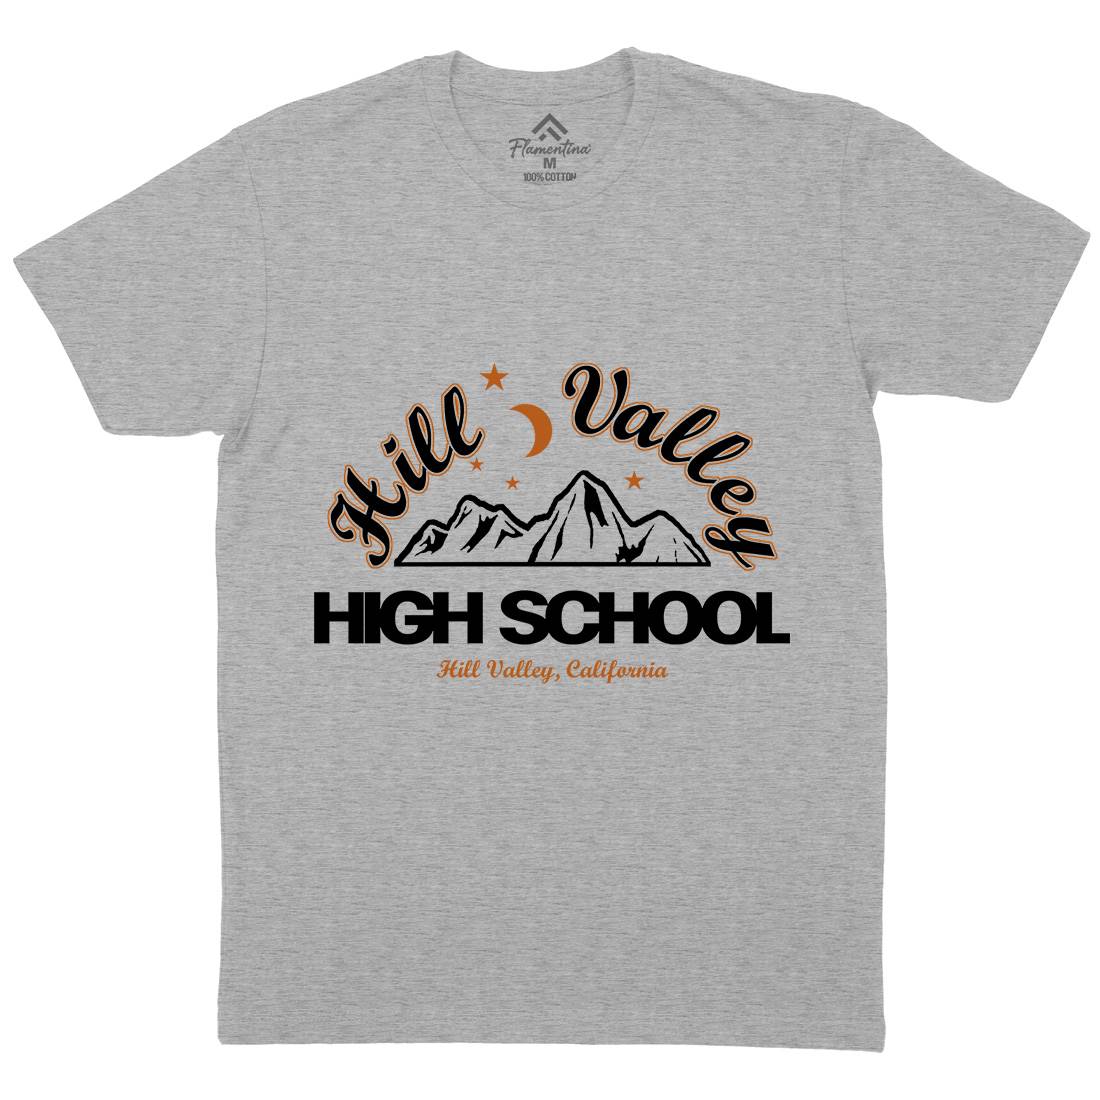 Hill Valley Mens Crew Neck T-Shirt Space D402